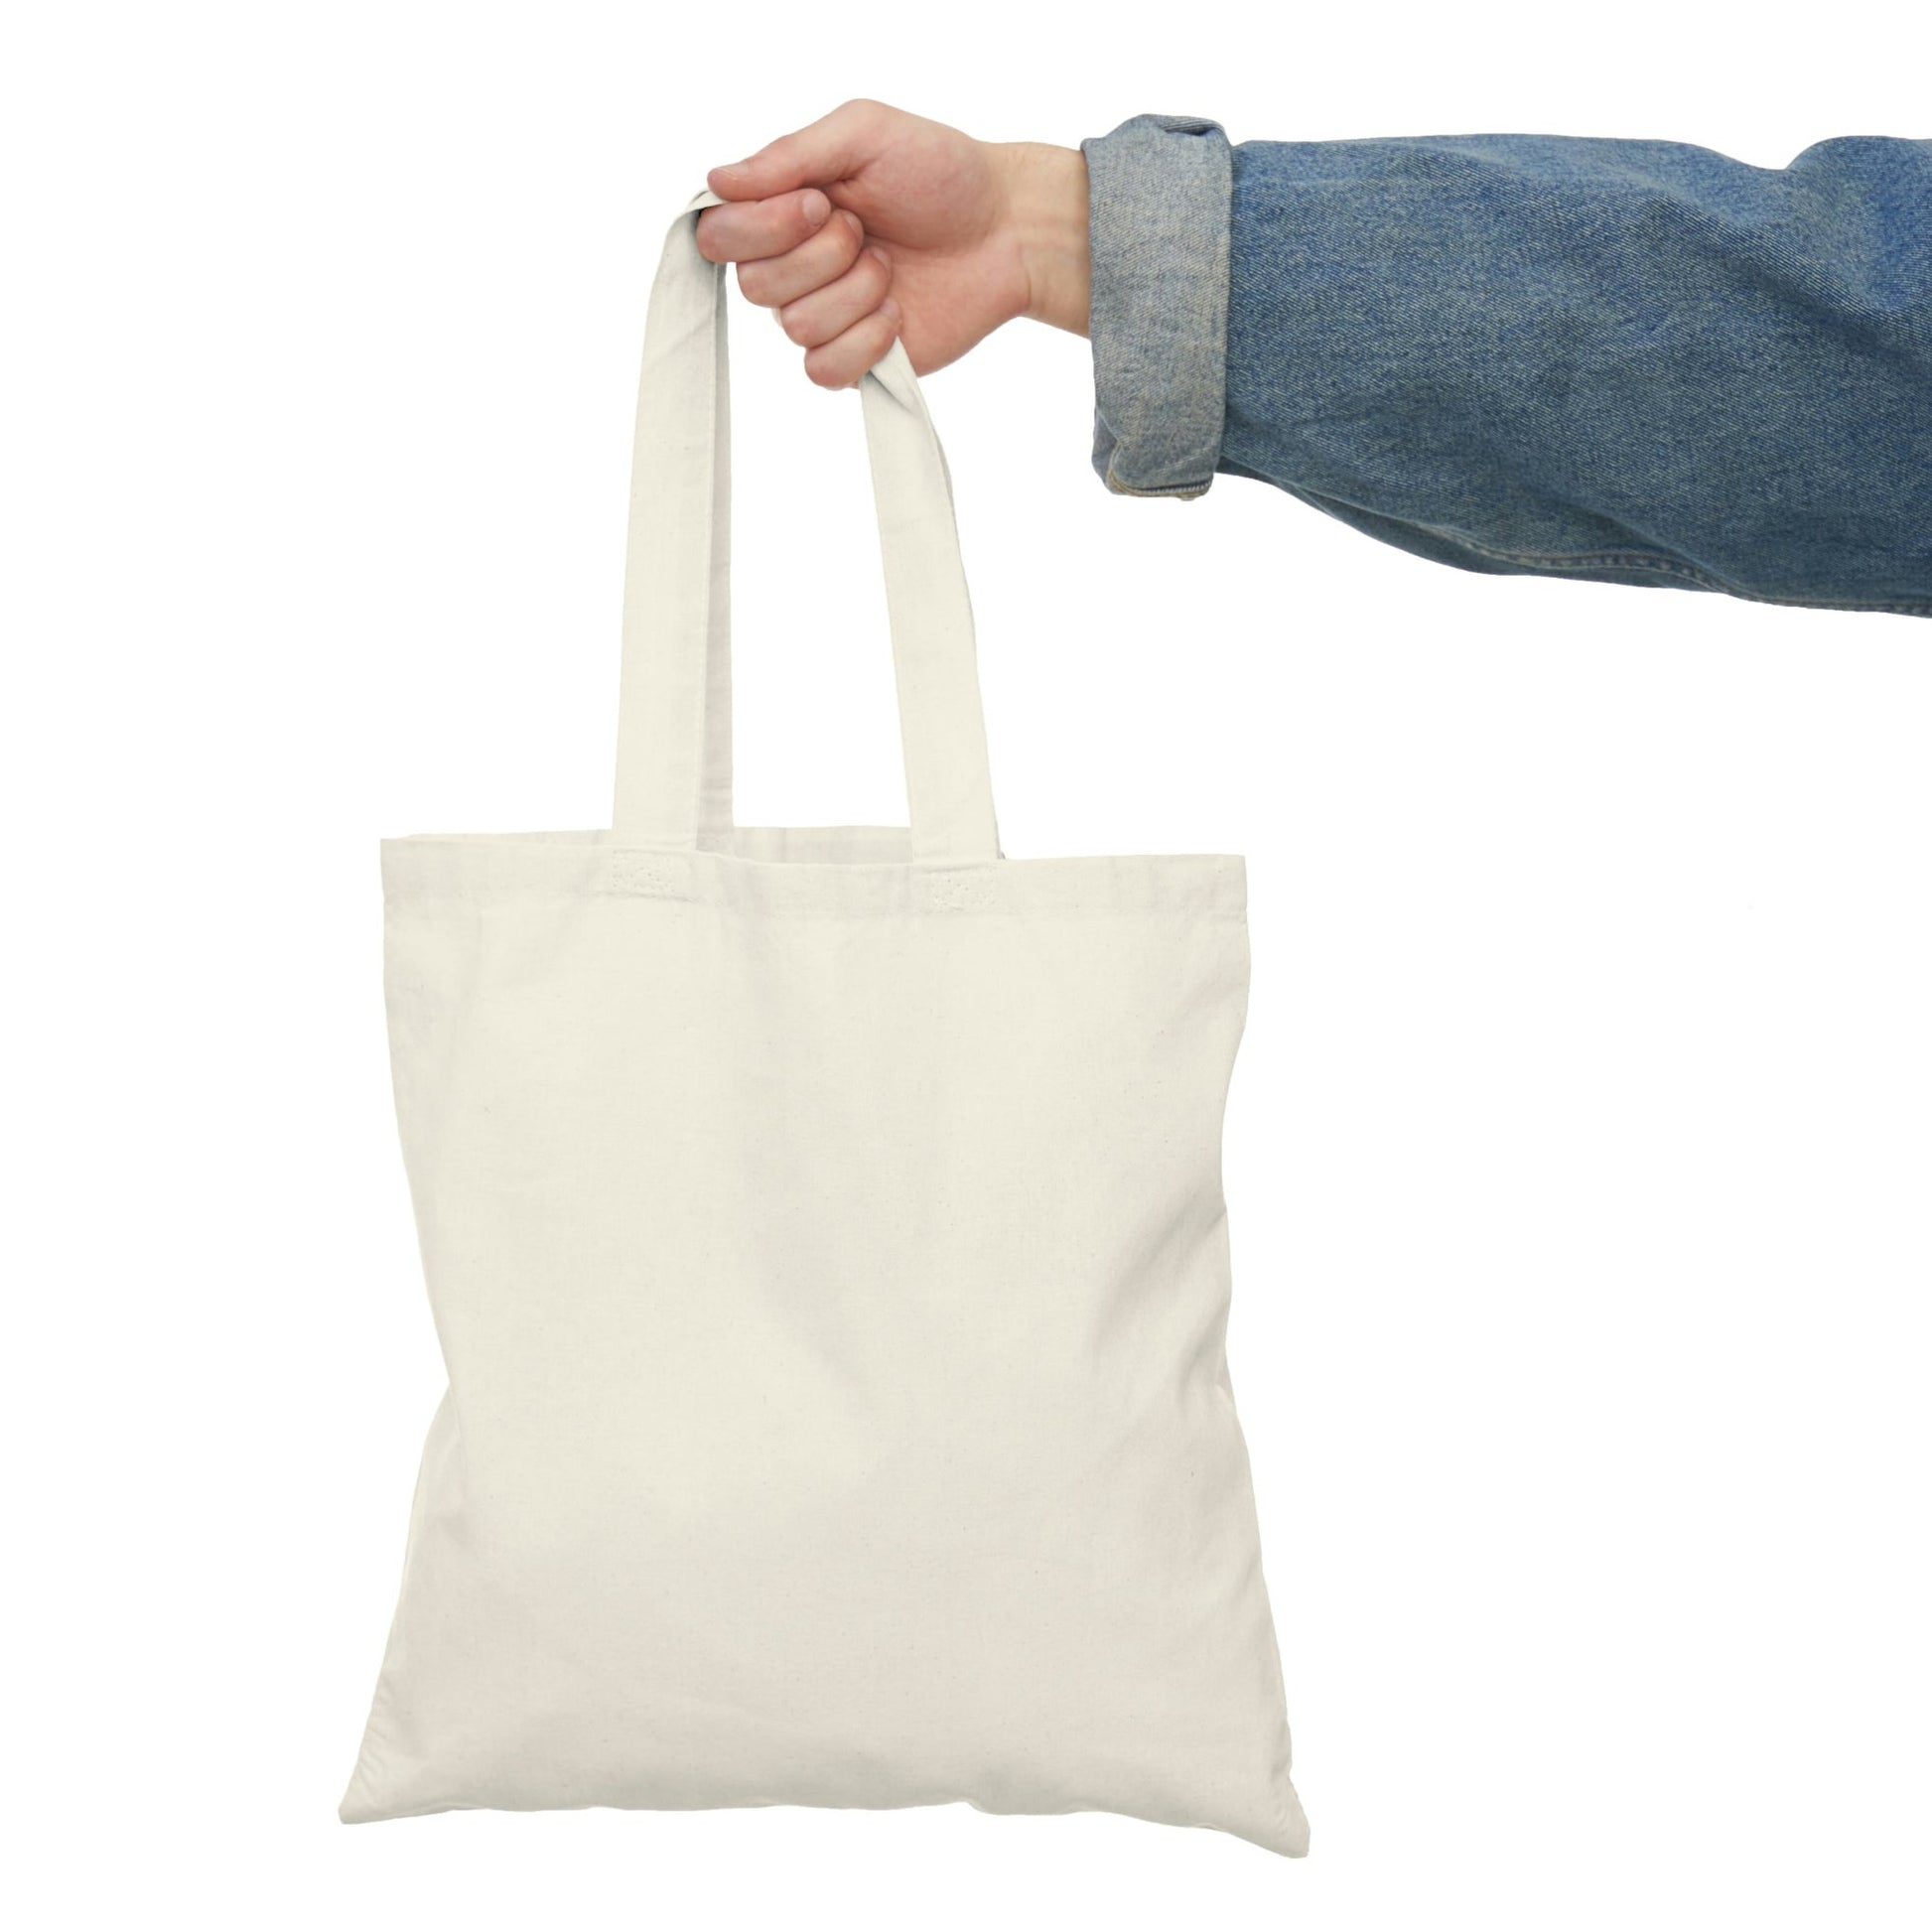 Sabotage the Patriarchy Feminist Tote Bag in Natural